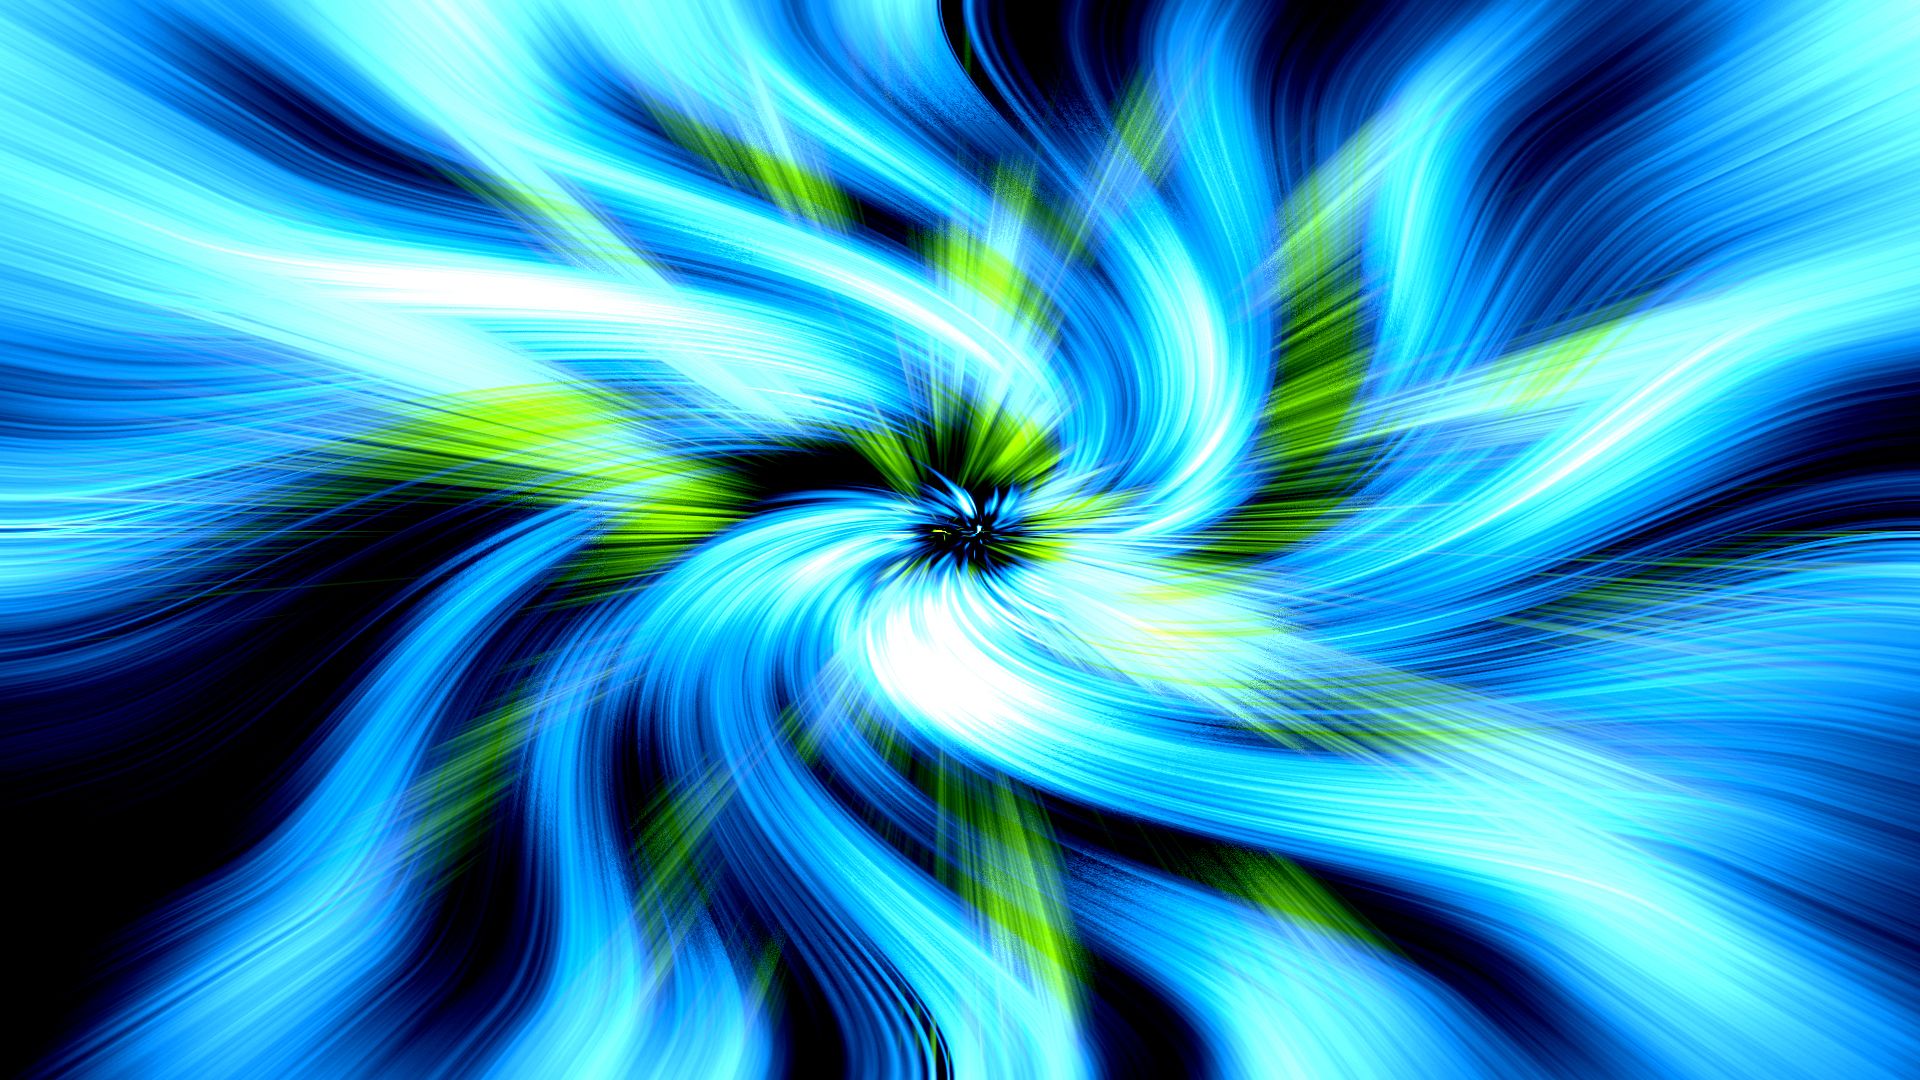 Free download Abstract Swirl Wallpaper [1920x1080]